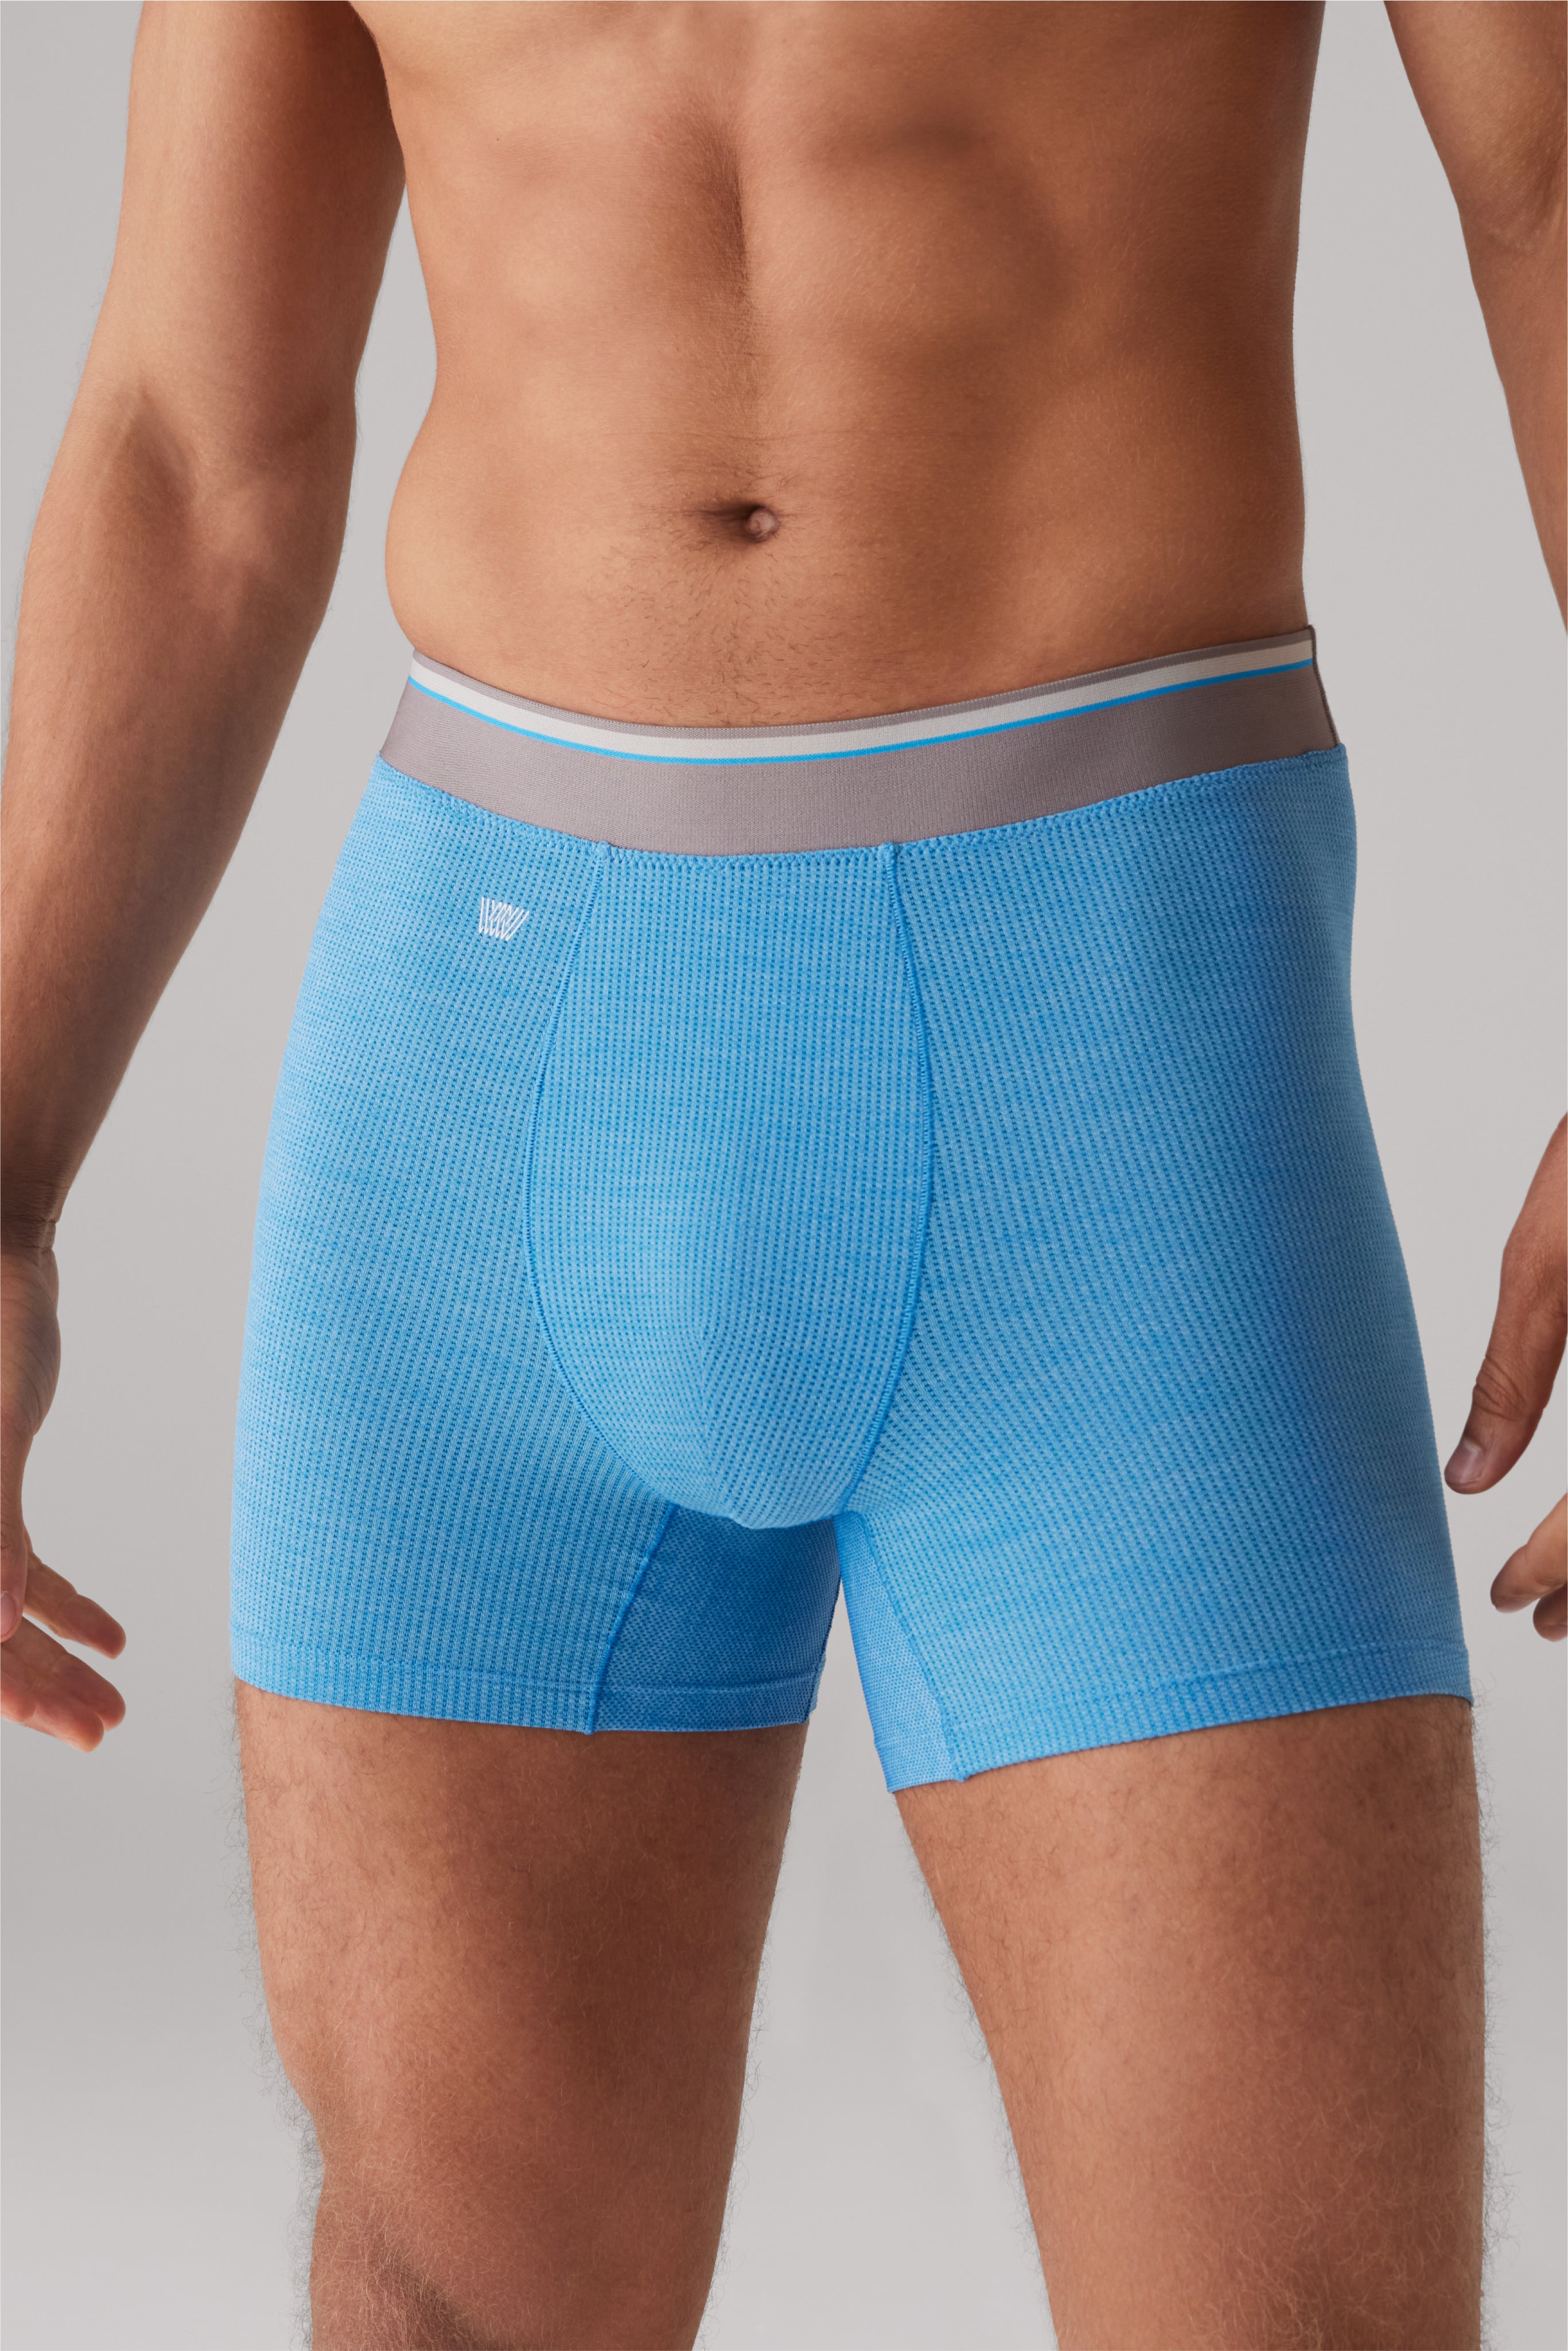 Men's full rise pouch style knit brief in colors 2-pack 